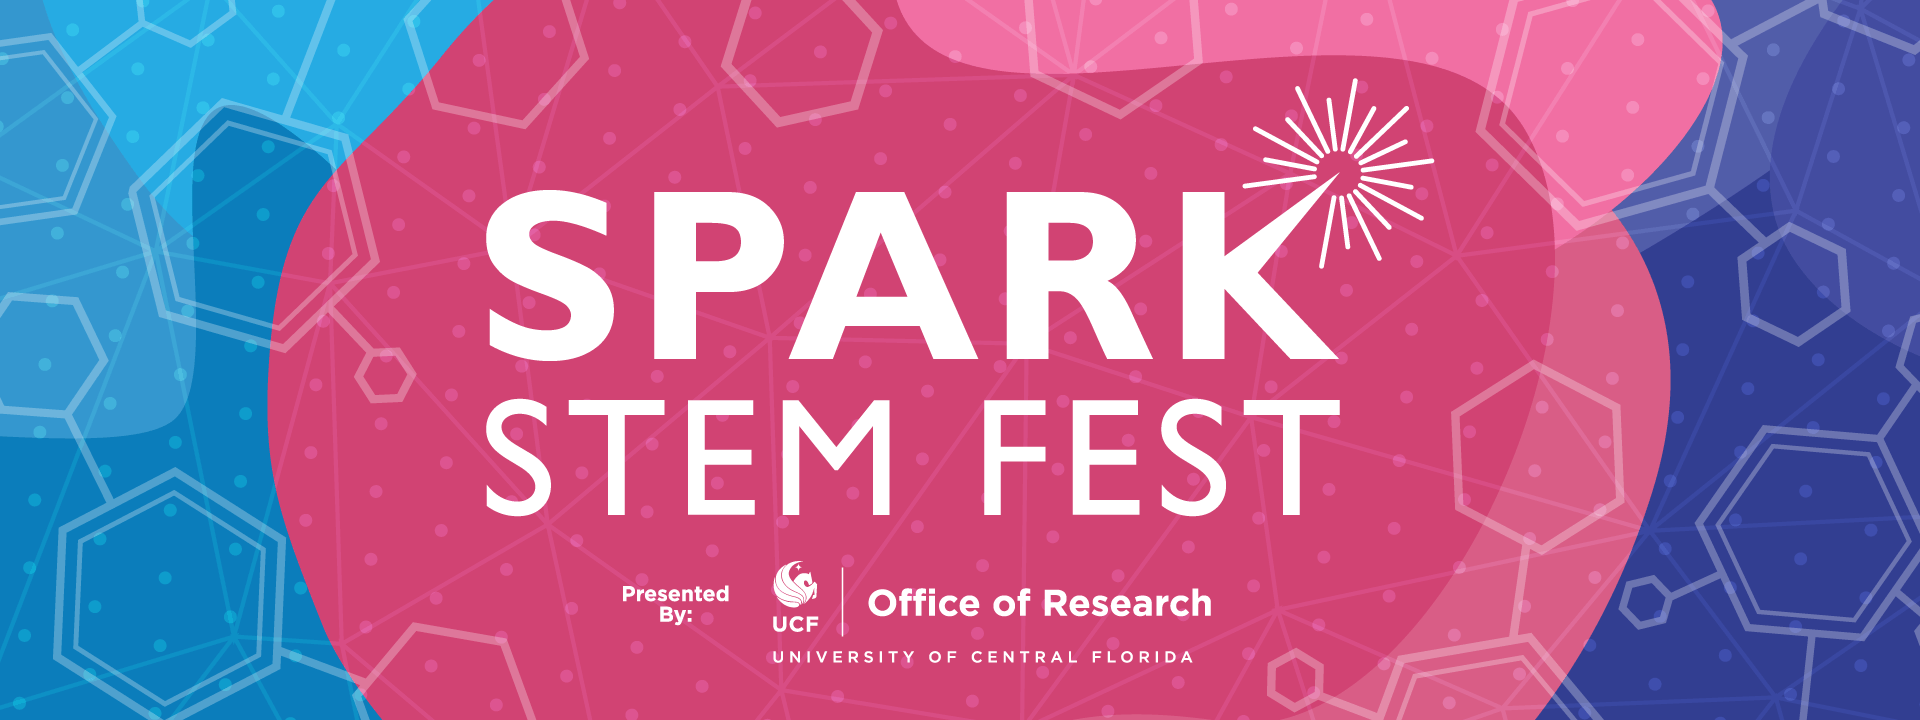 Spark STEM Fest – Presented by UCF, Office of Research